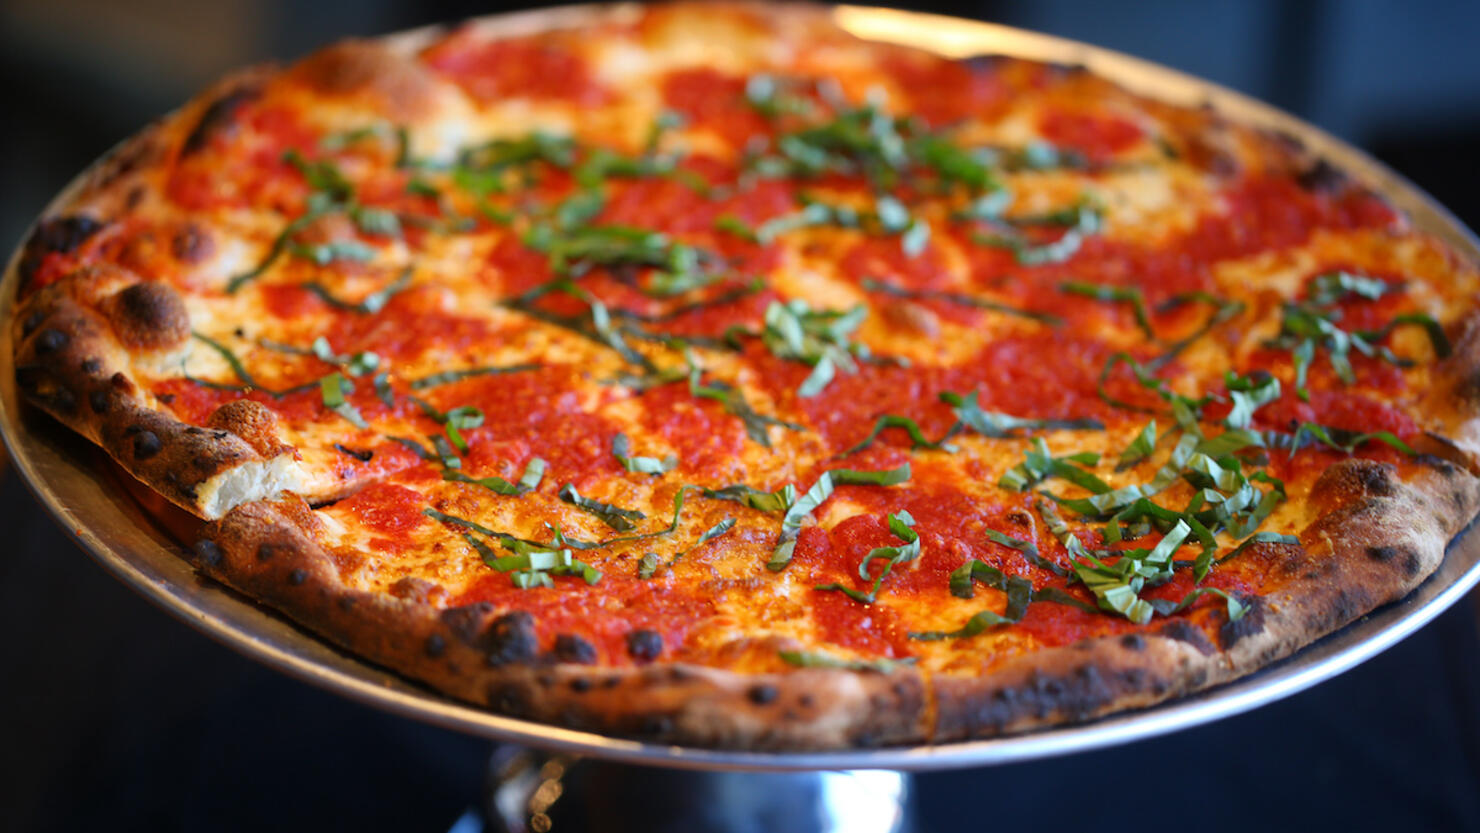 This Restaurant Serves Connecticut's Best Pizza iHeart